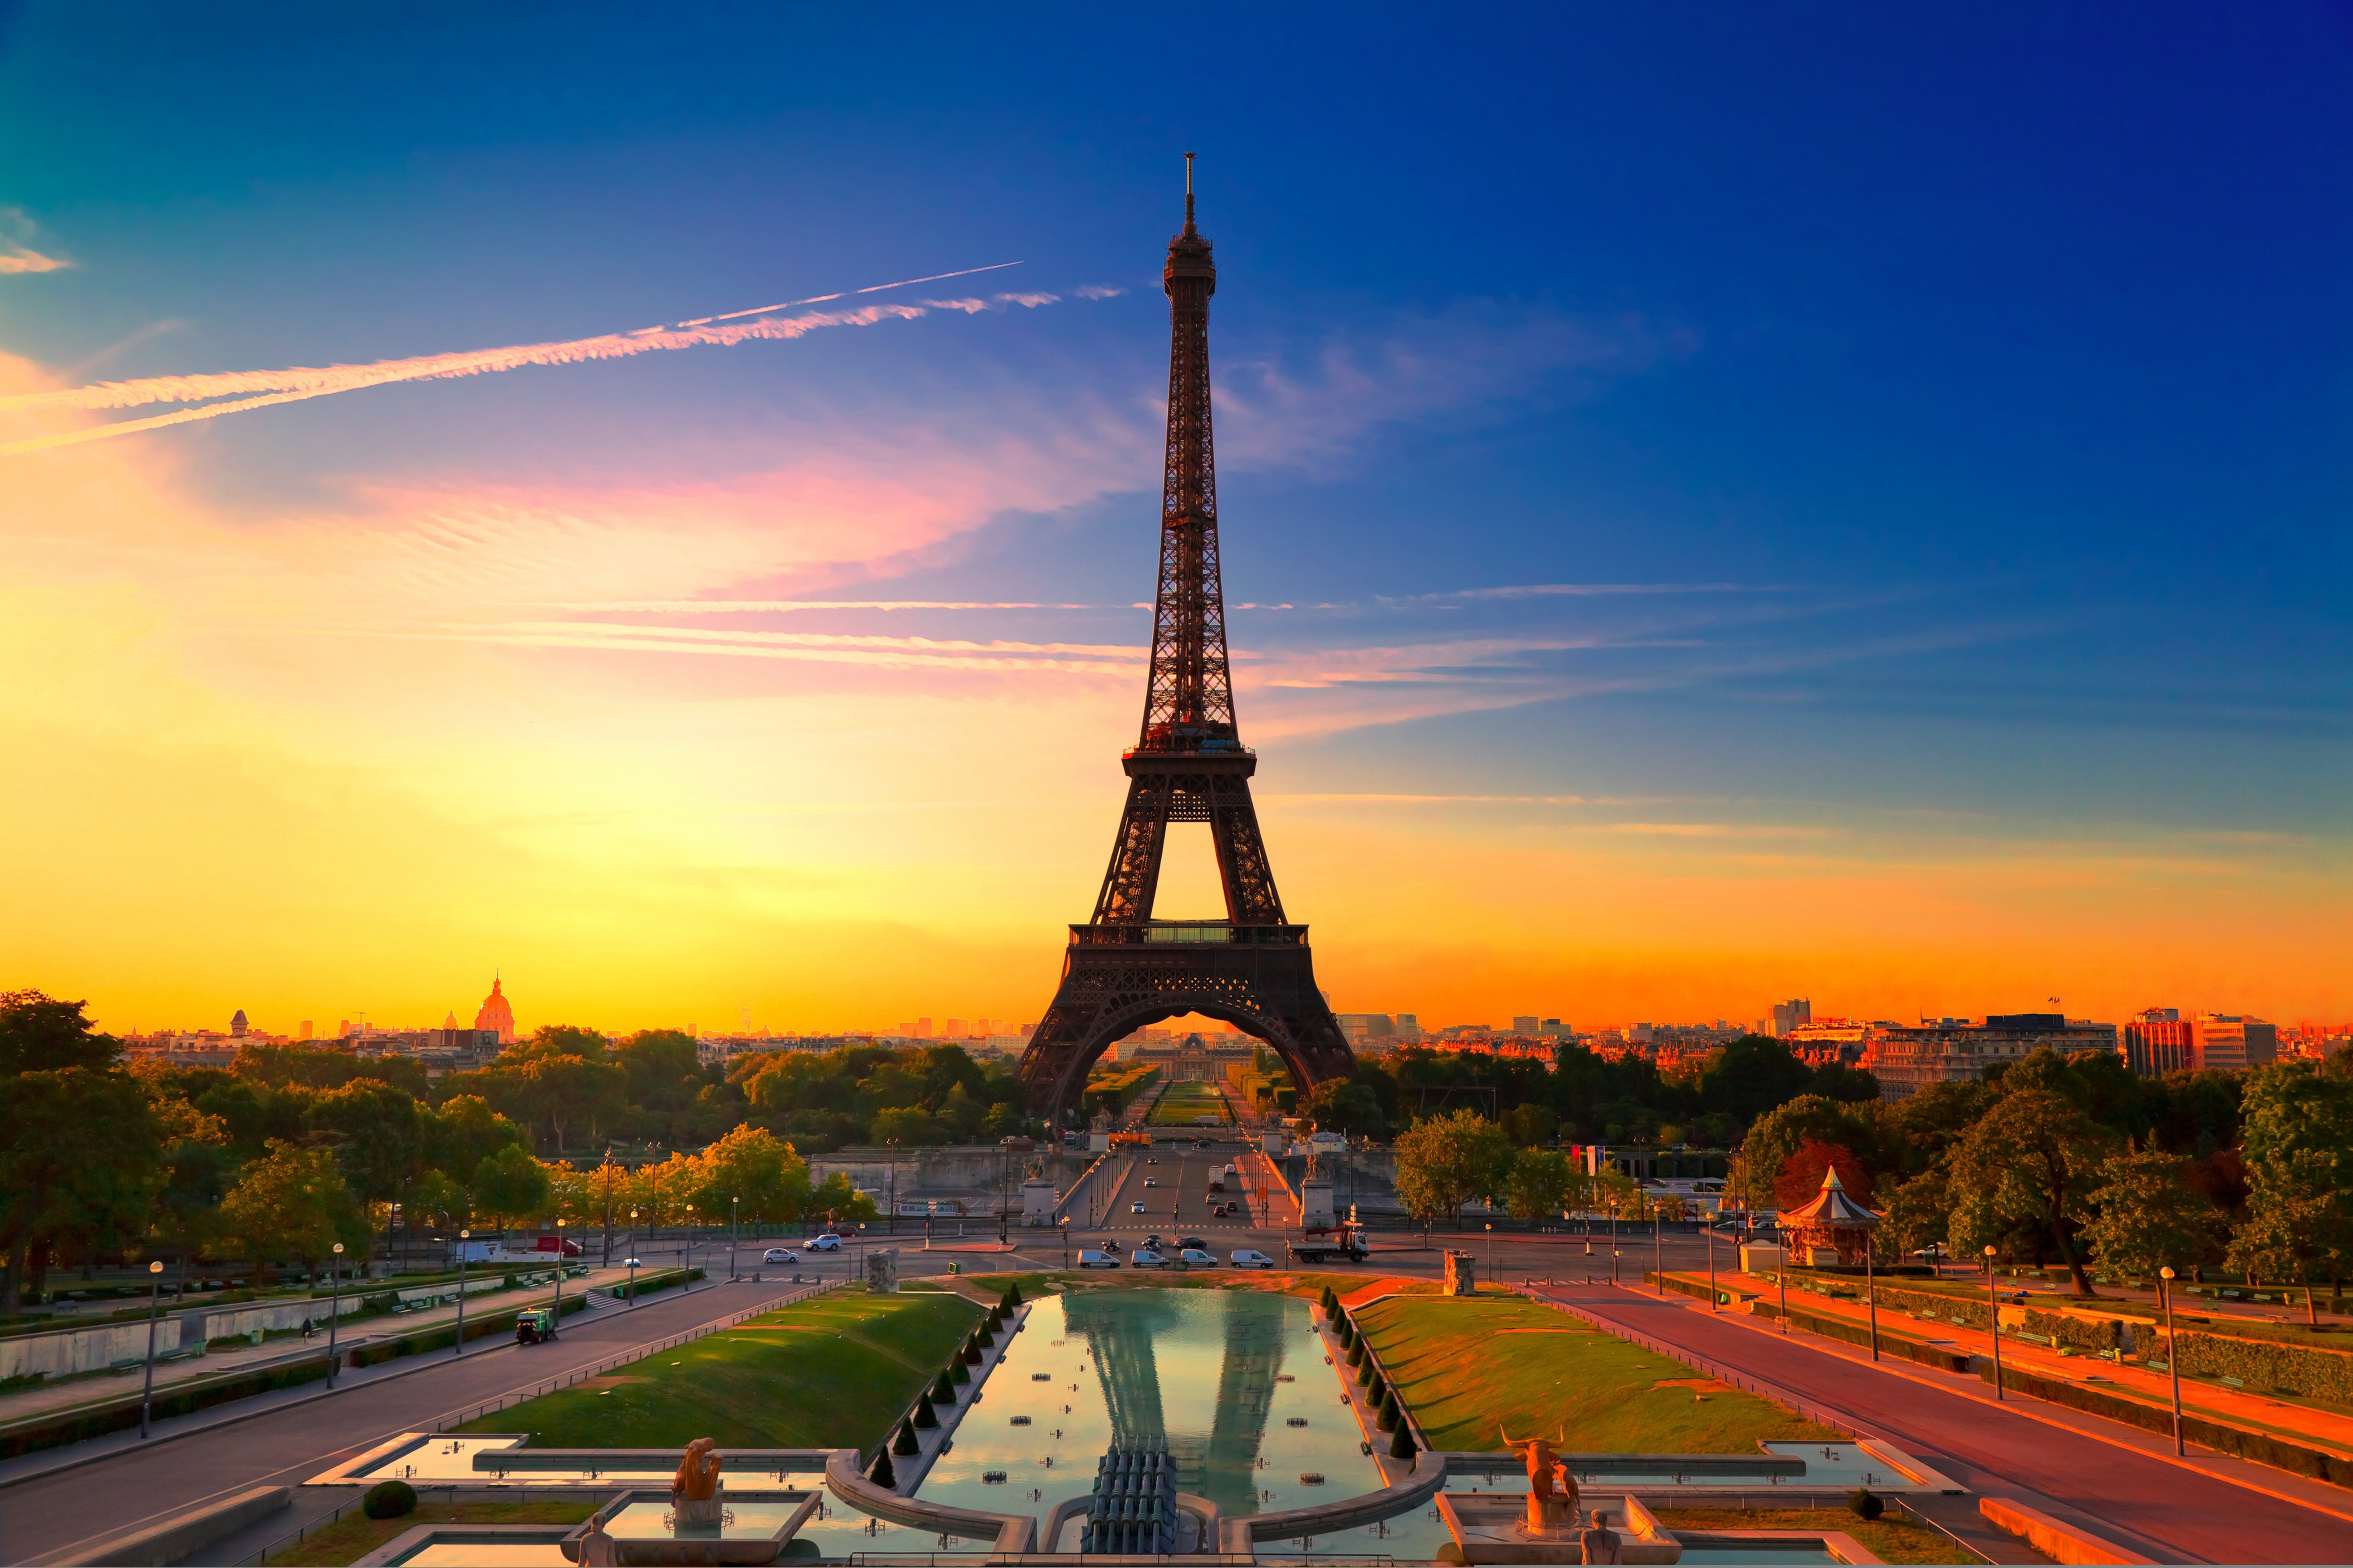 Eiffel Tower, Paris France, sunset, the city, colorful, beautiful france